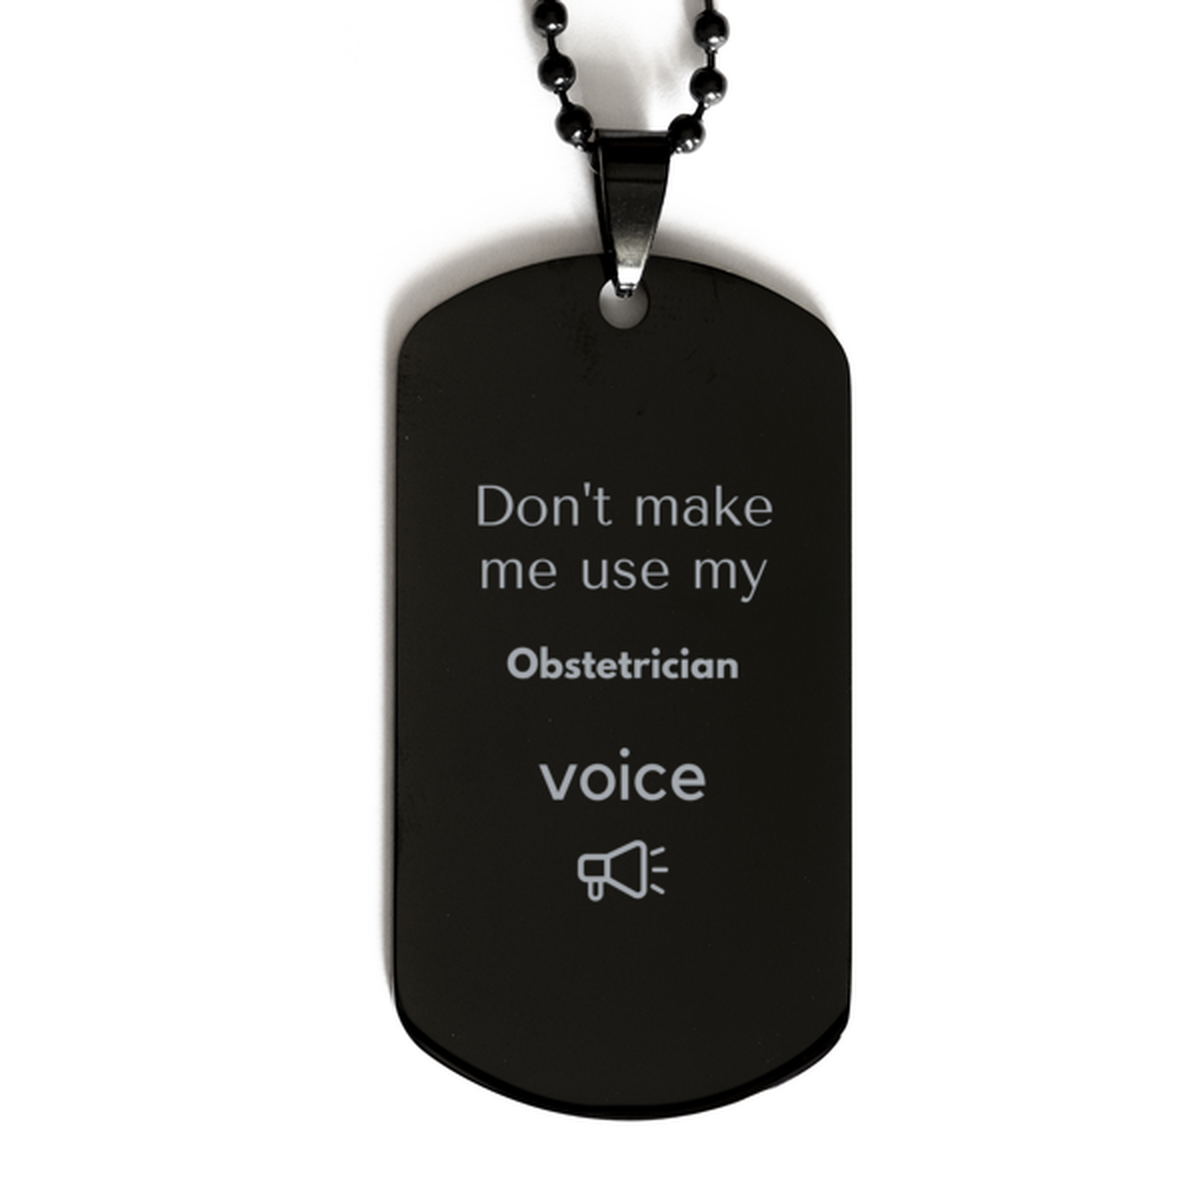 Don't make me use my Obstetrician voice, Sarcasm Obstetrician Gifts, Christmas Obstetrician Black Dog Tag Birthday Unique Gifts For Obstetrician Coworkers, Men, Women, Colleague, Friends